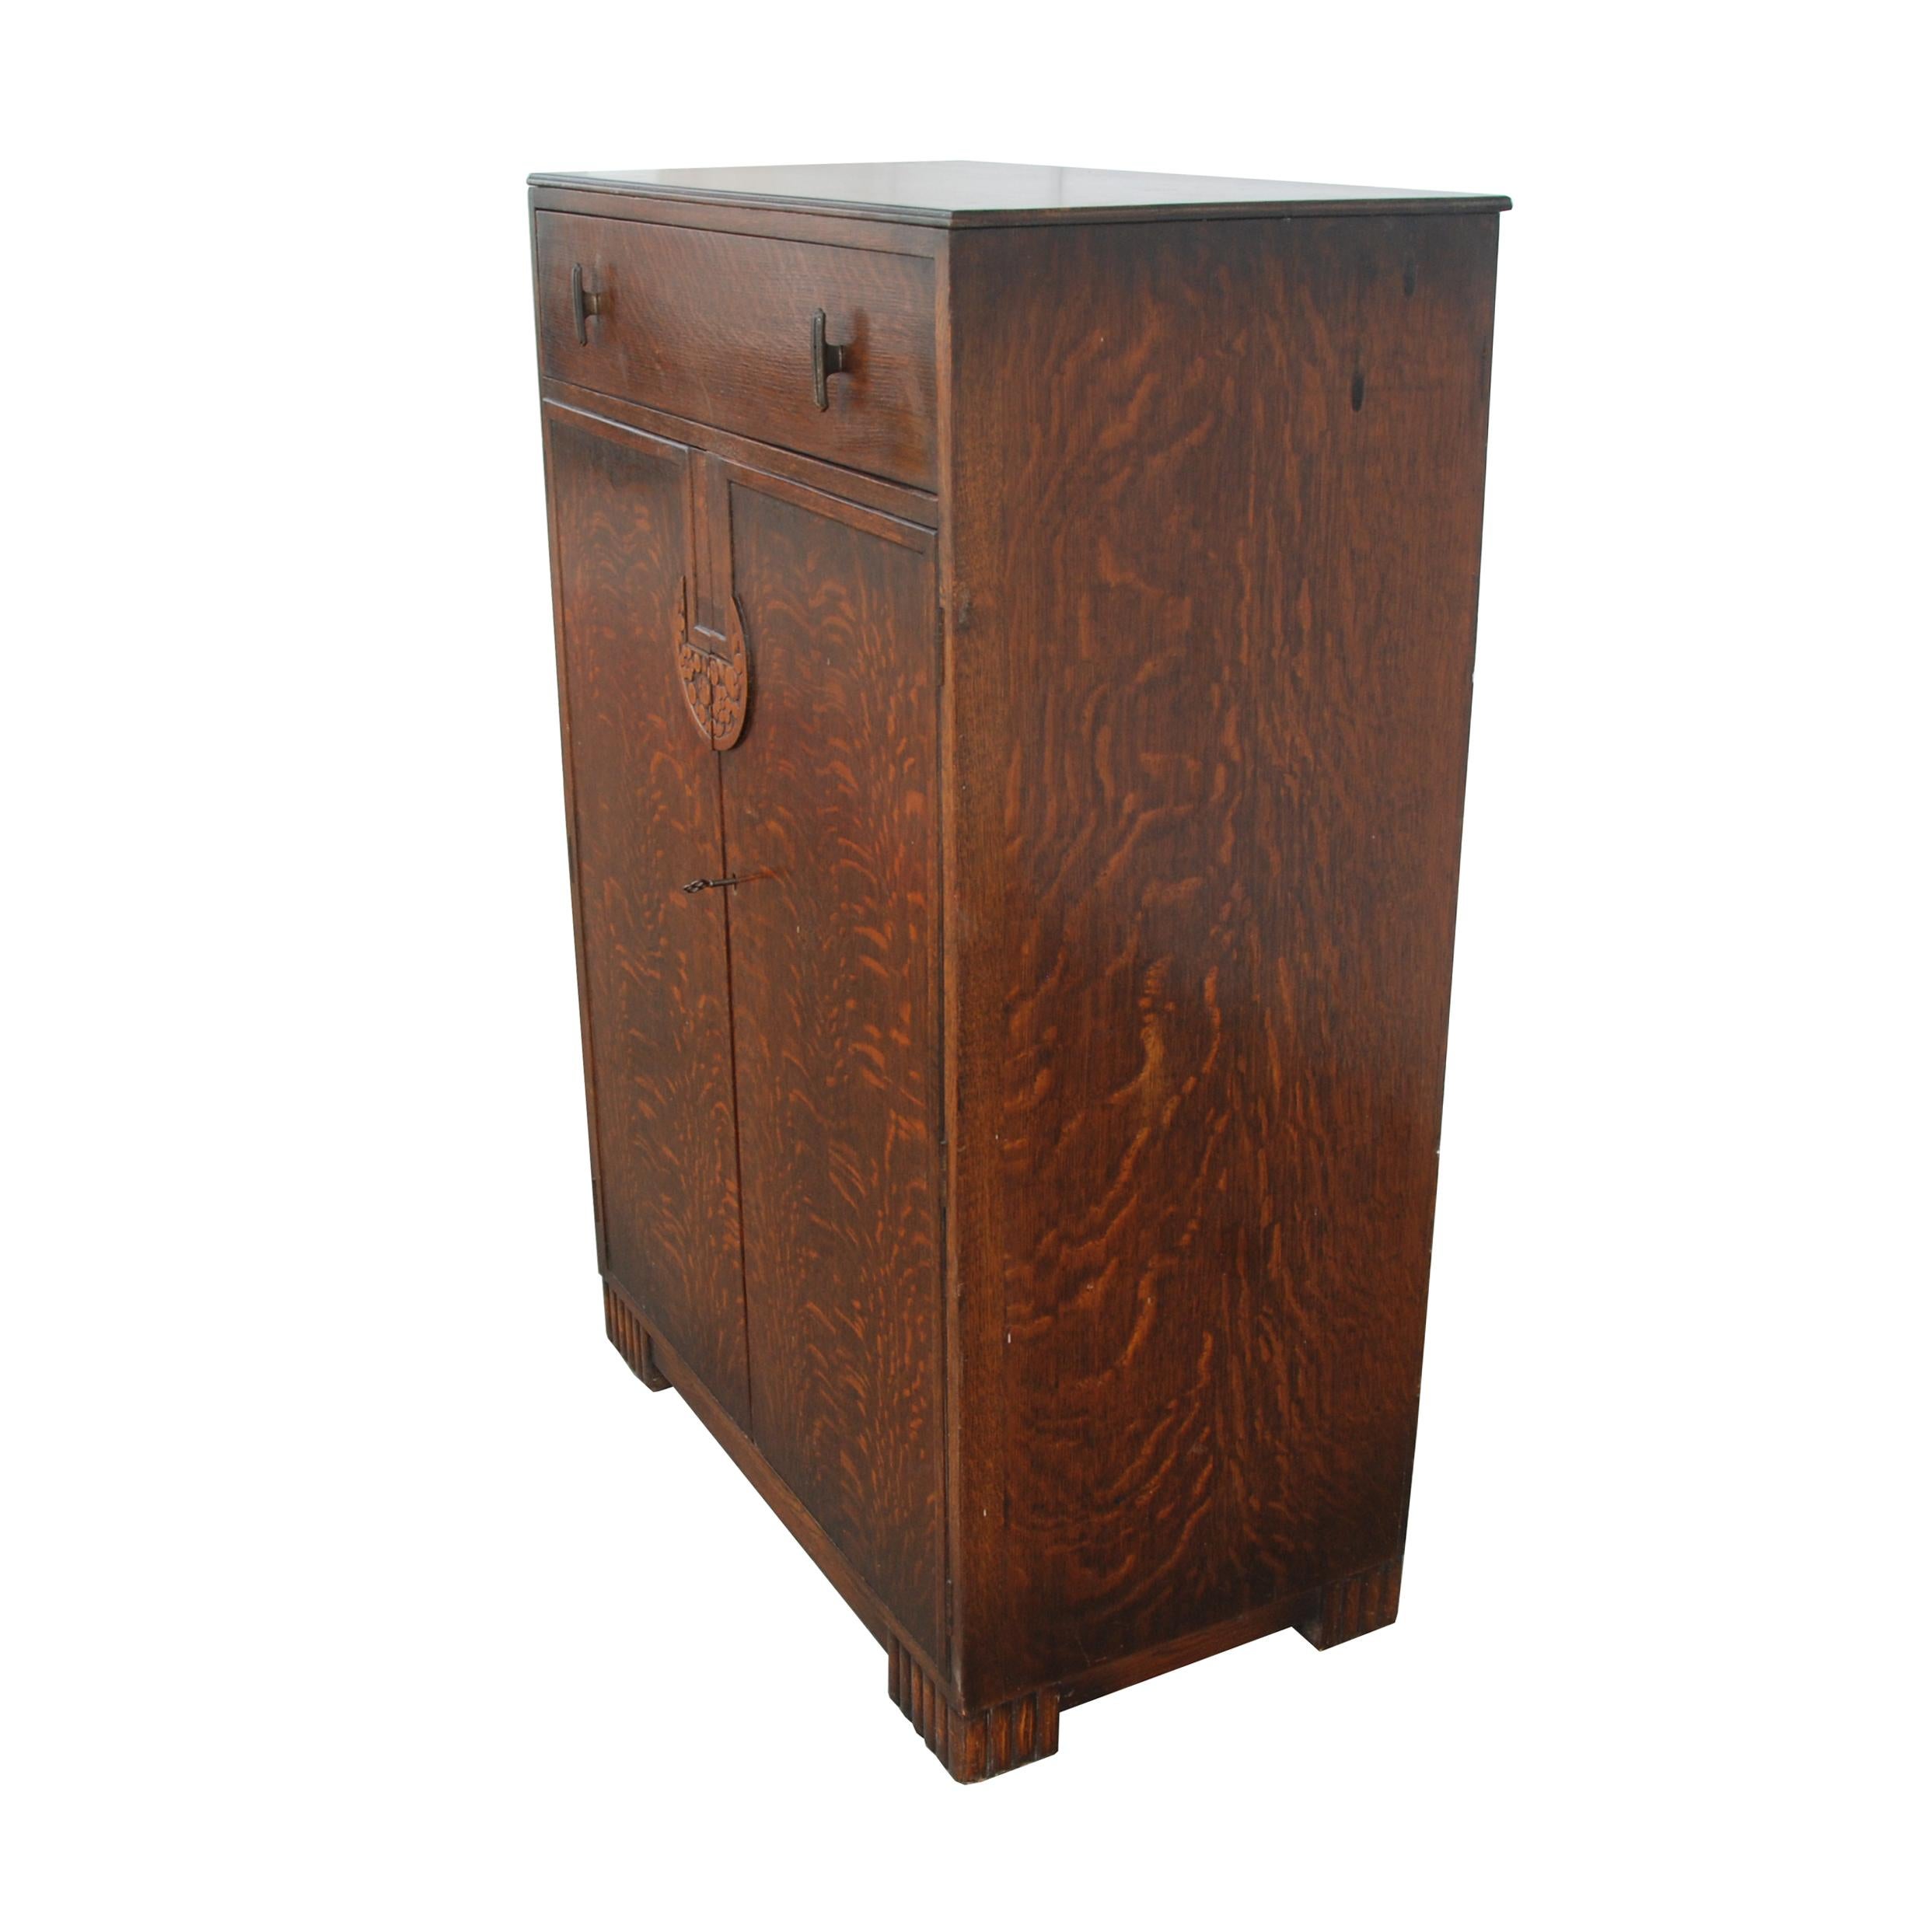 Art Deco Tiger Oak Cabinet

Features a light gold finish on interior shelves, as well as a locking mechanism with key for the large cabinets. Top drawers do not lock. 

Carved wood on handles and legs.